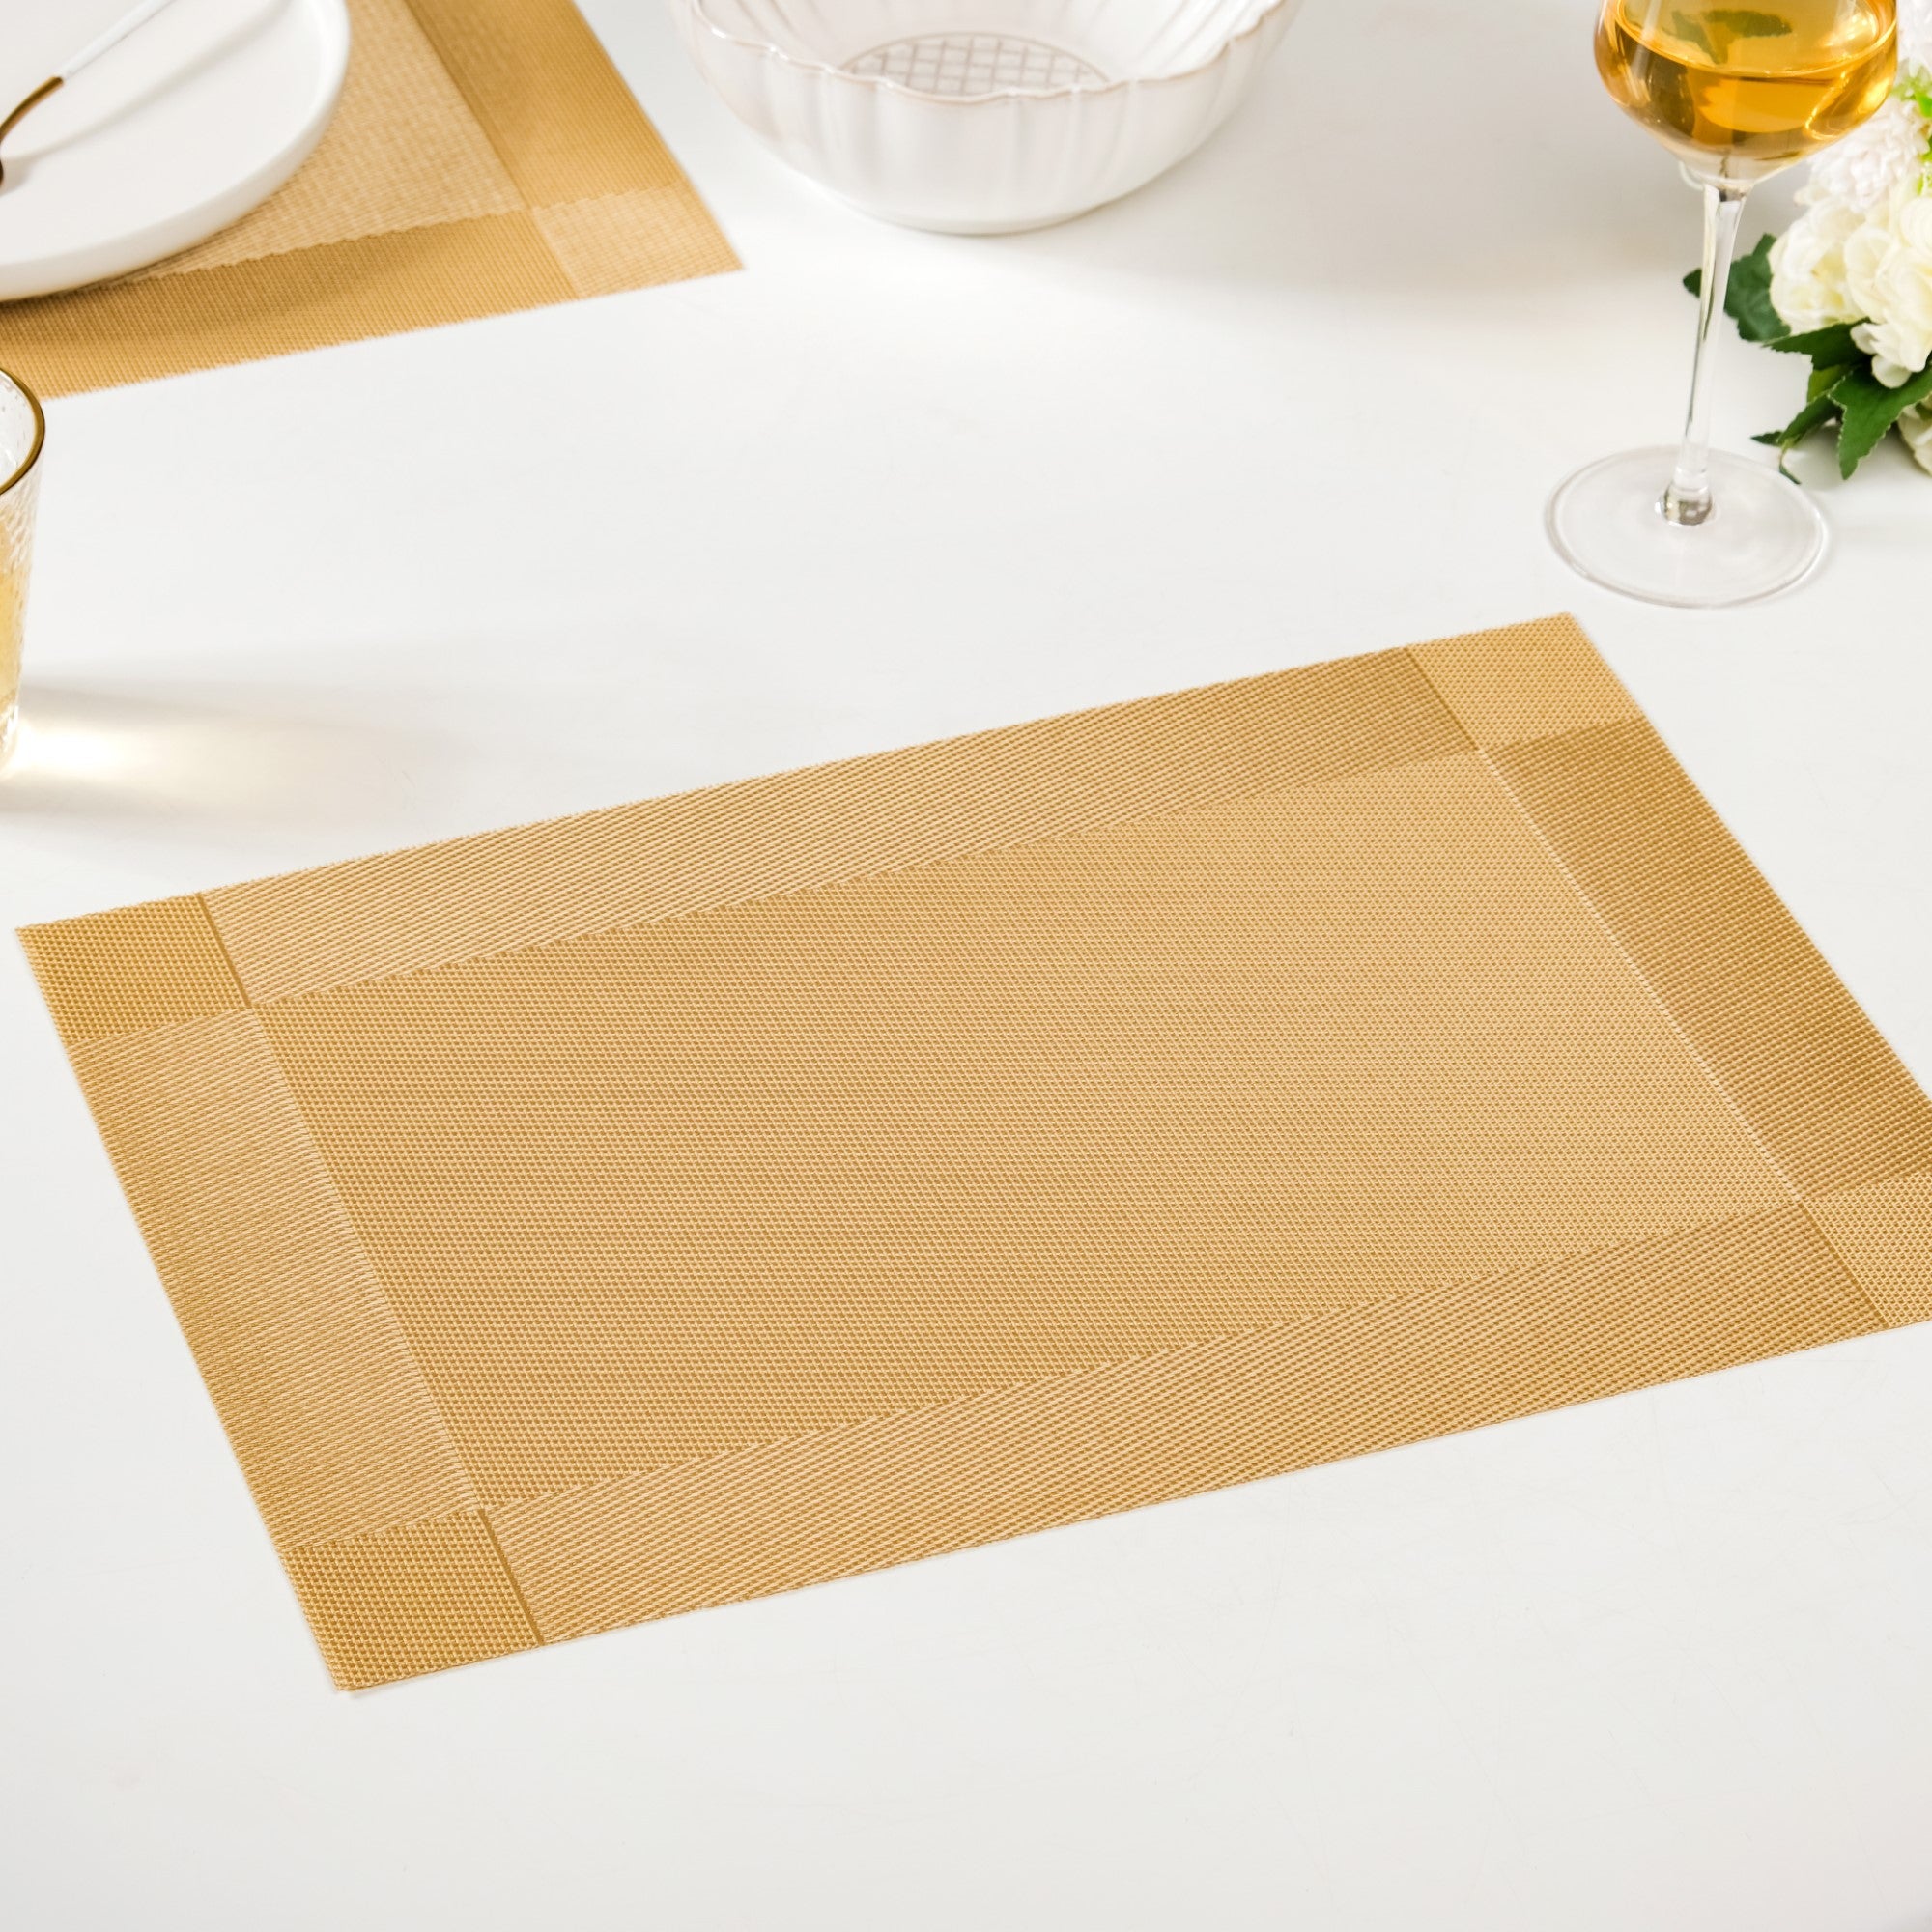 Leather Placemats Set of 6 Reversible Table Mats Heat Resistant